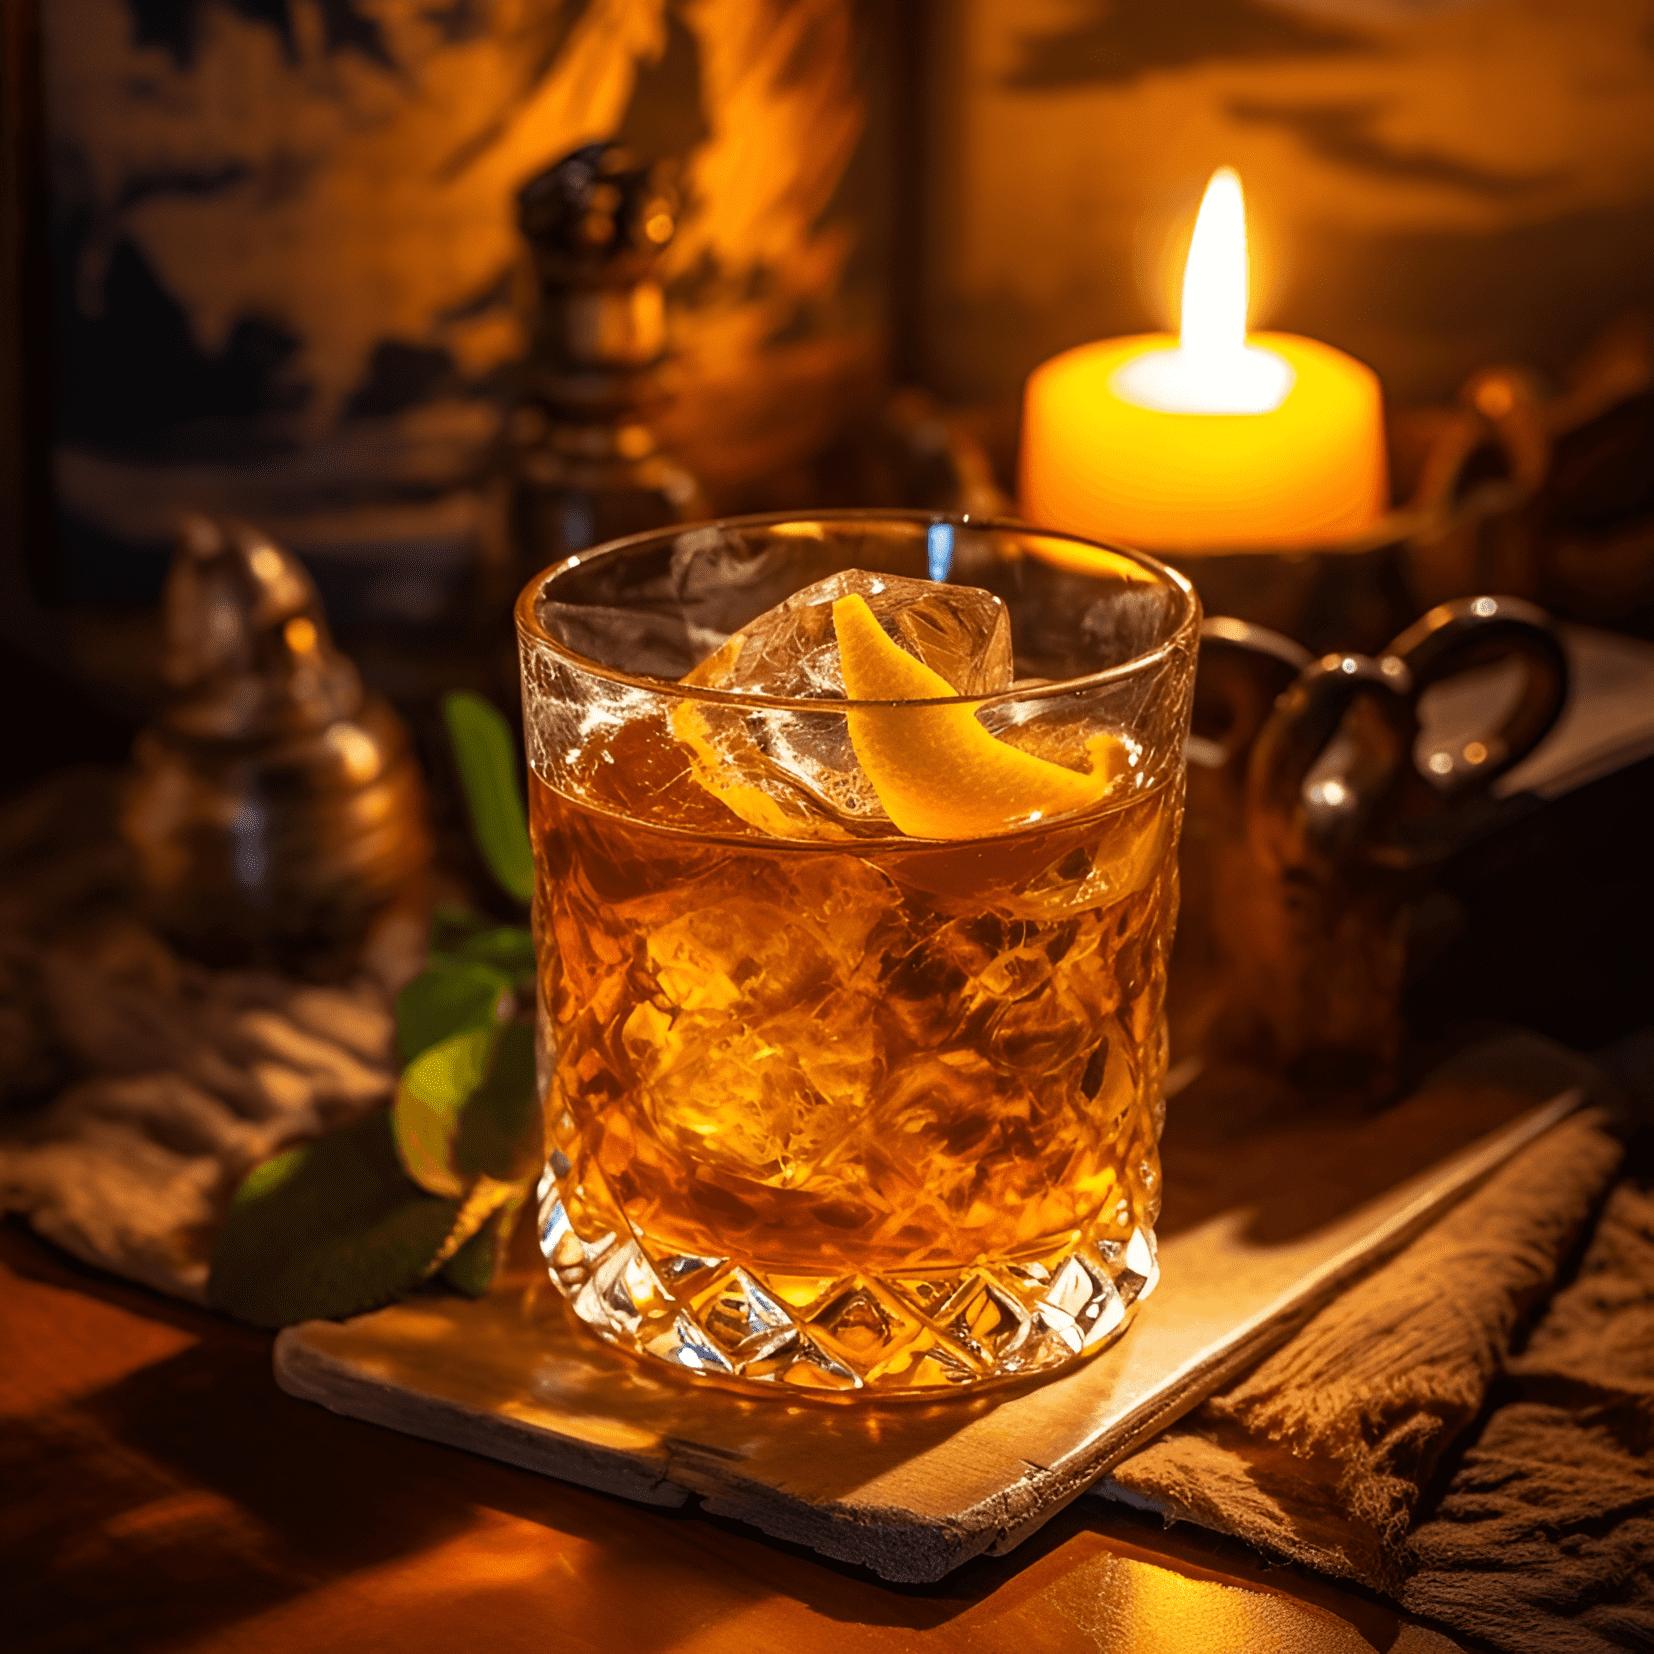 Grog Cocktail Recipe - Grog has a unique balance of flavors, with a strong, warming rum base, tangy citrus notes from the lemon juice, and a hint of sweetness from the sugar. The addition of water helps to mellow out the intensity of the rum, making it a smooth and enjoyable drink.